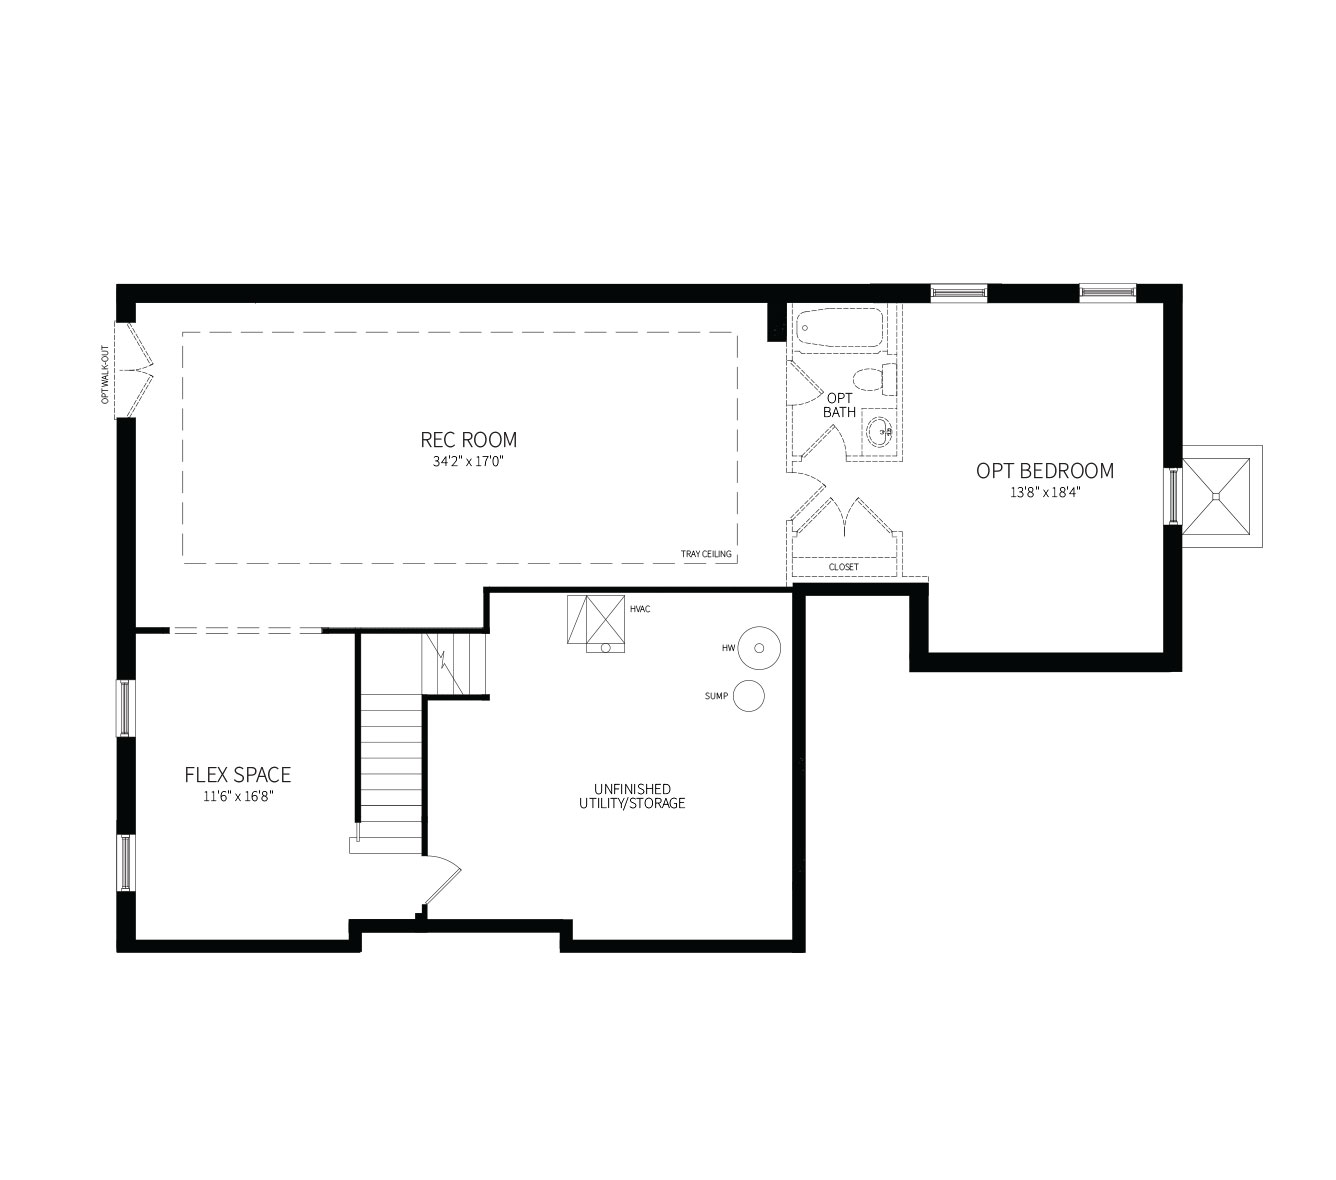 The proposed optional basement plan for the Clifton model, showing a Rec Room, Bedroom with Bath and additional Flex Space.